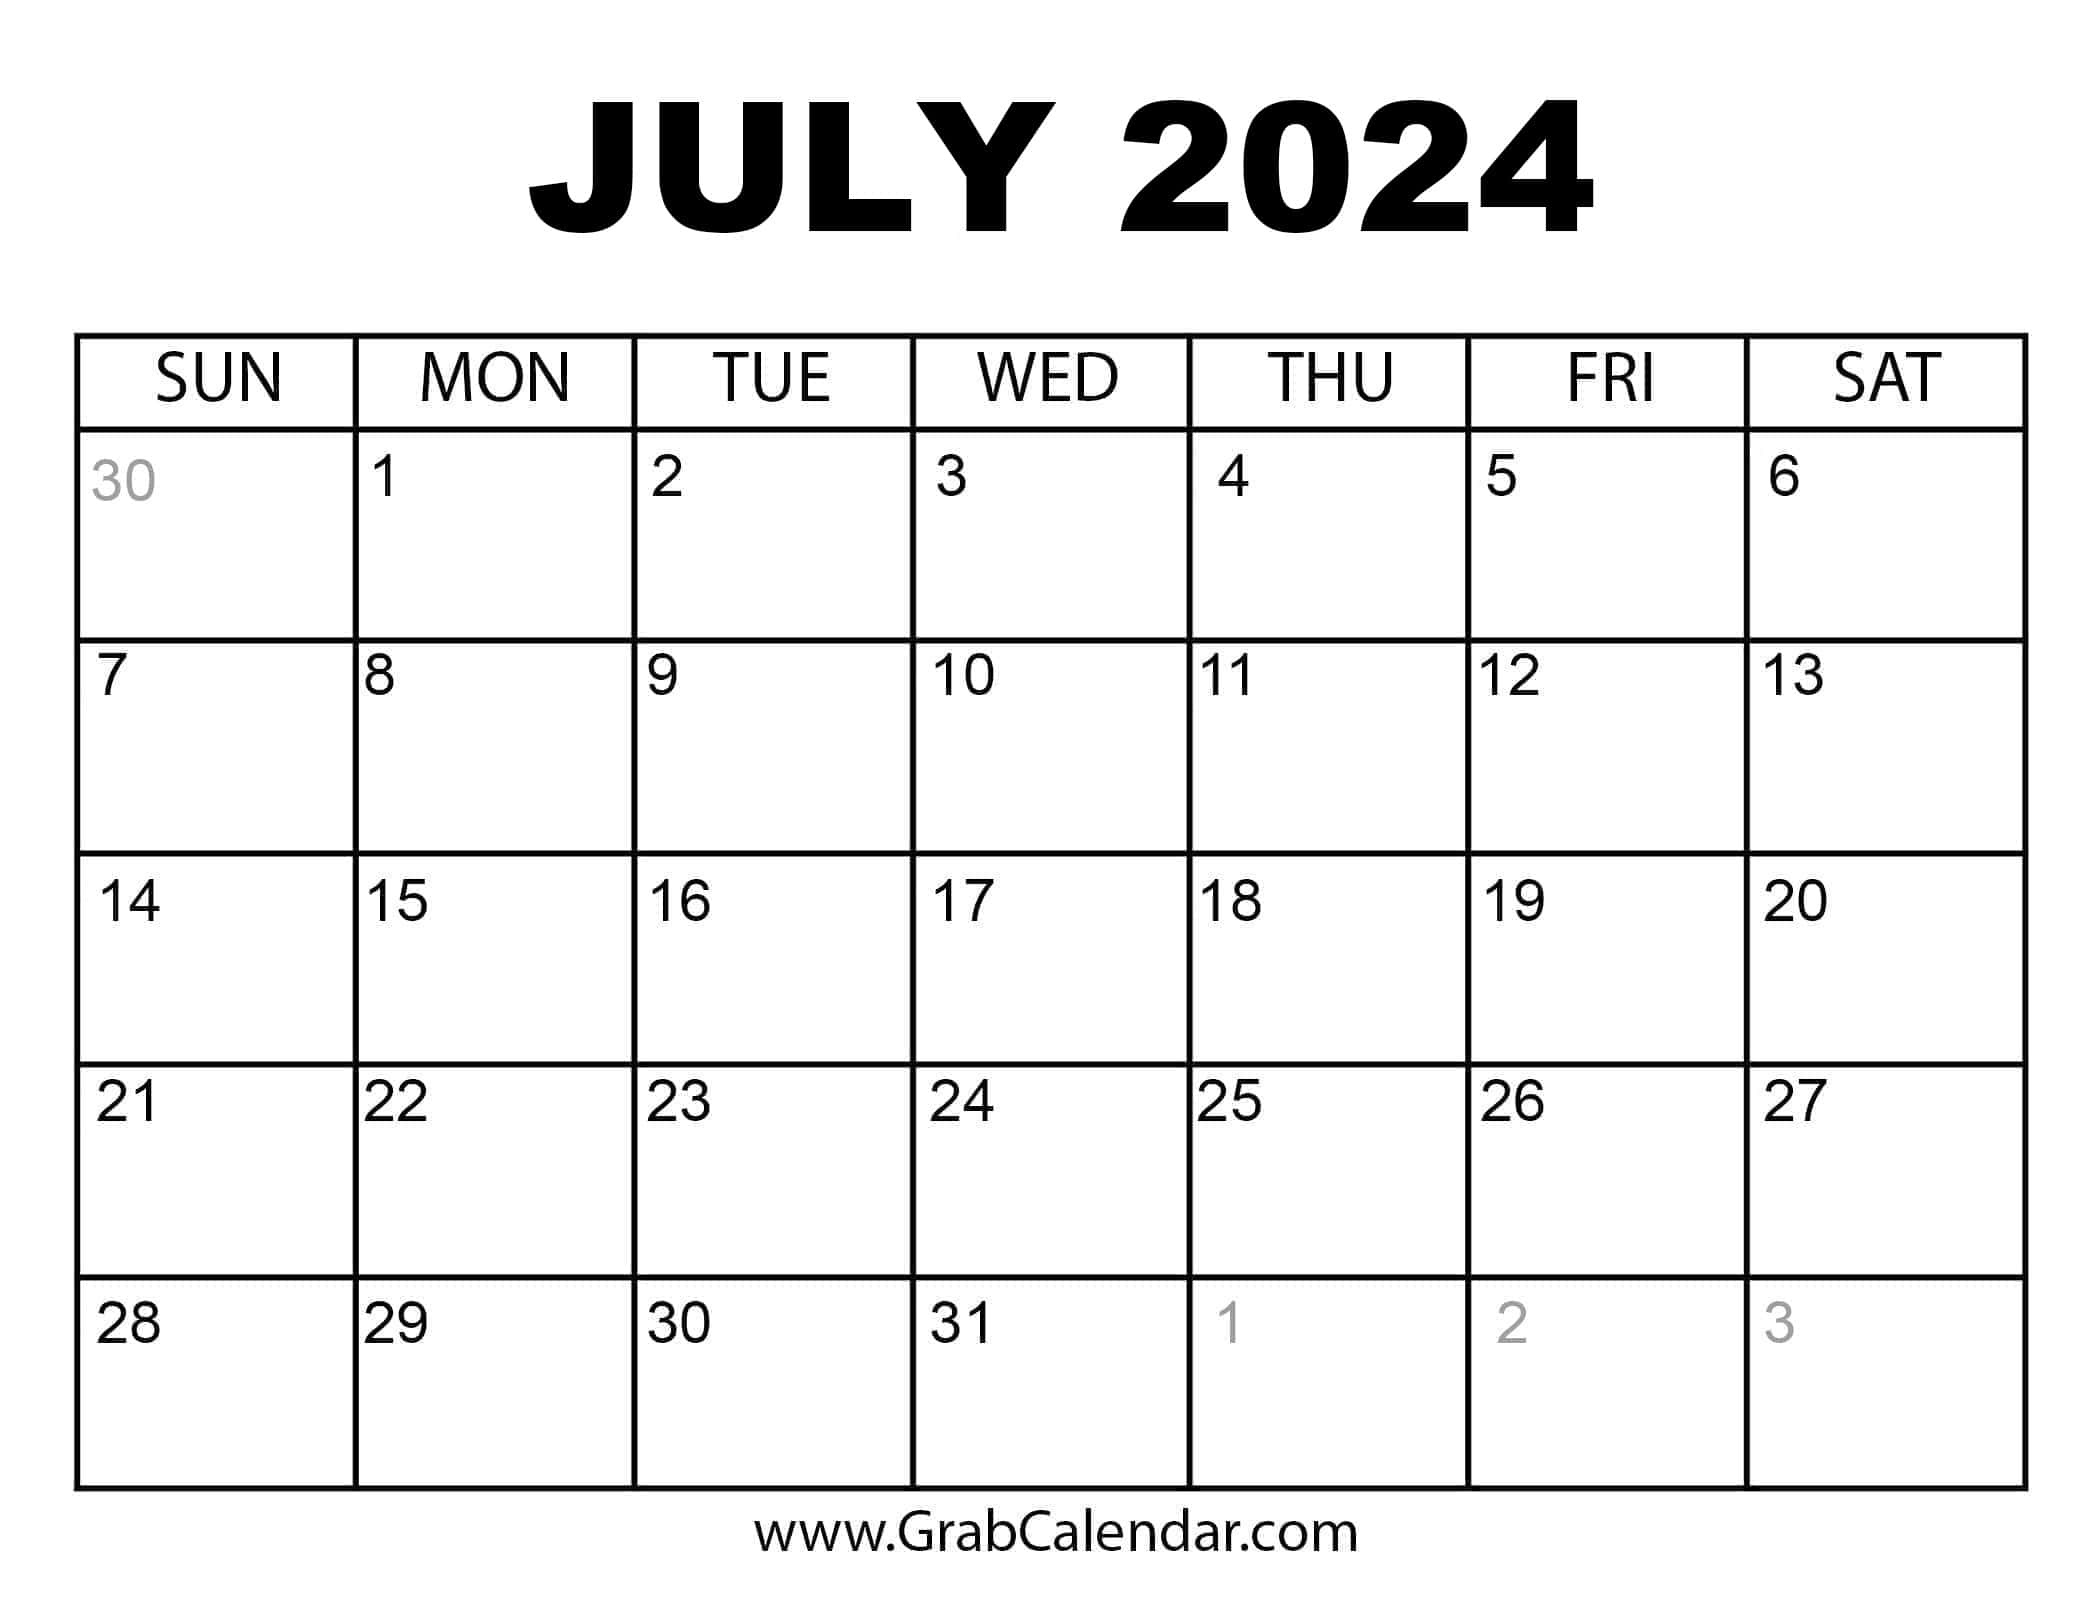 Printable July 2024 Calendar pertaining to Calendar For 2024 July